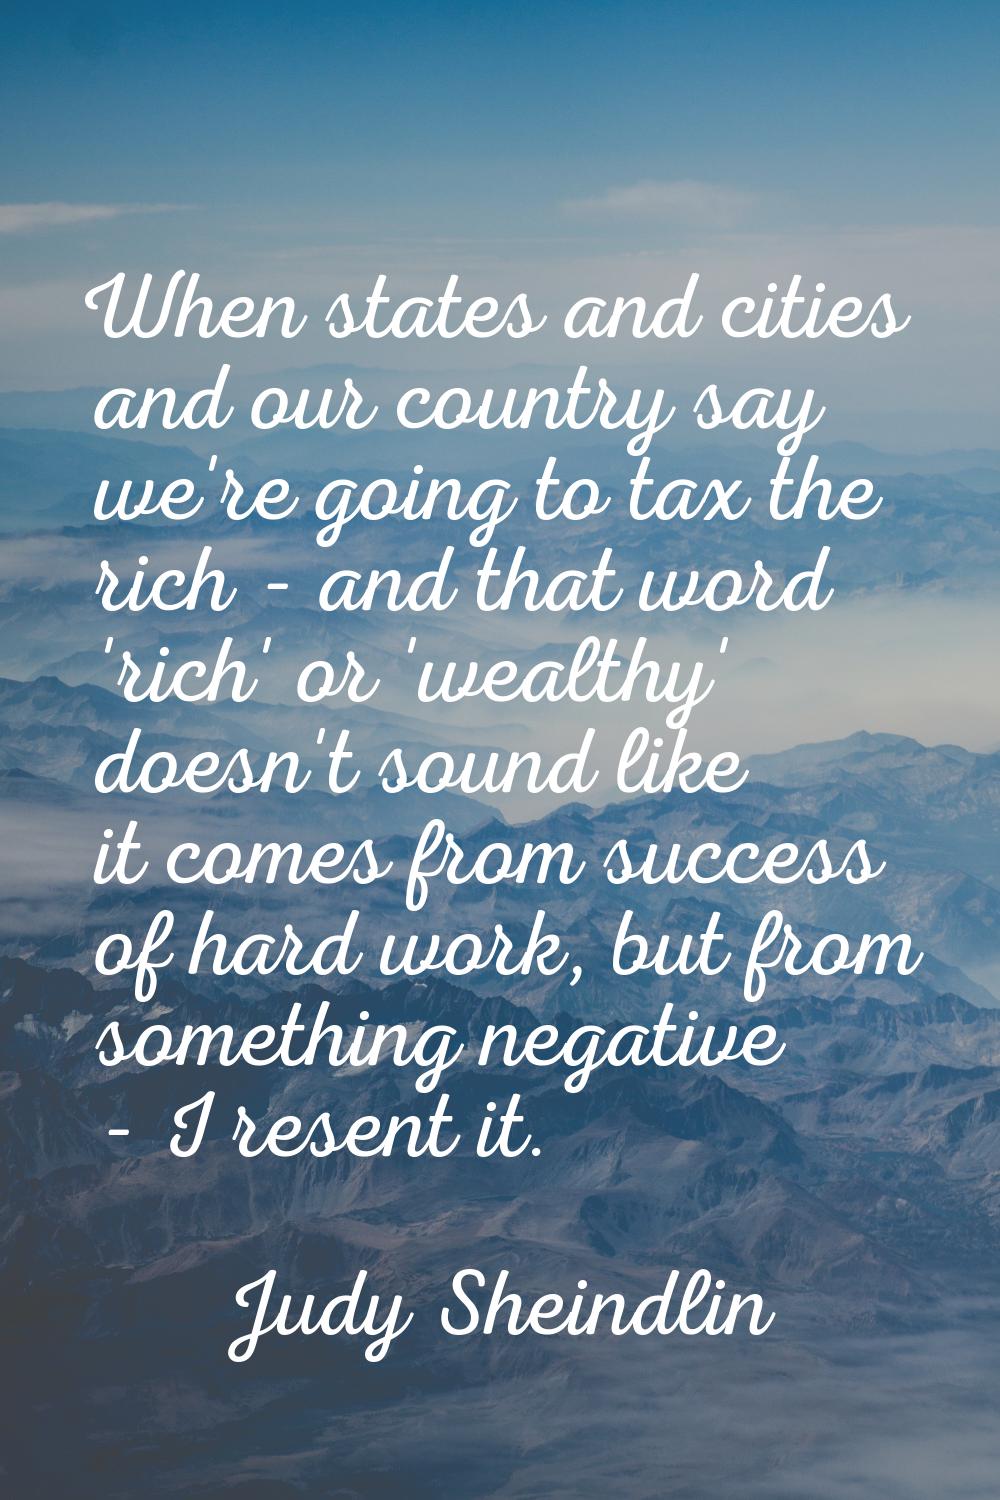 When states and cities and our country say we're going to tax the rich - and that word 'rich' or 'w